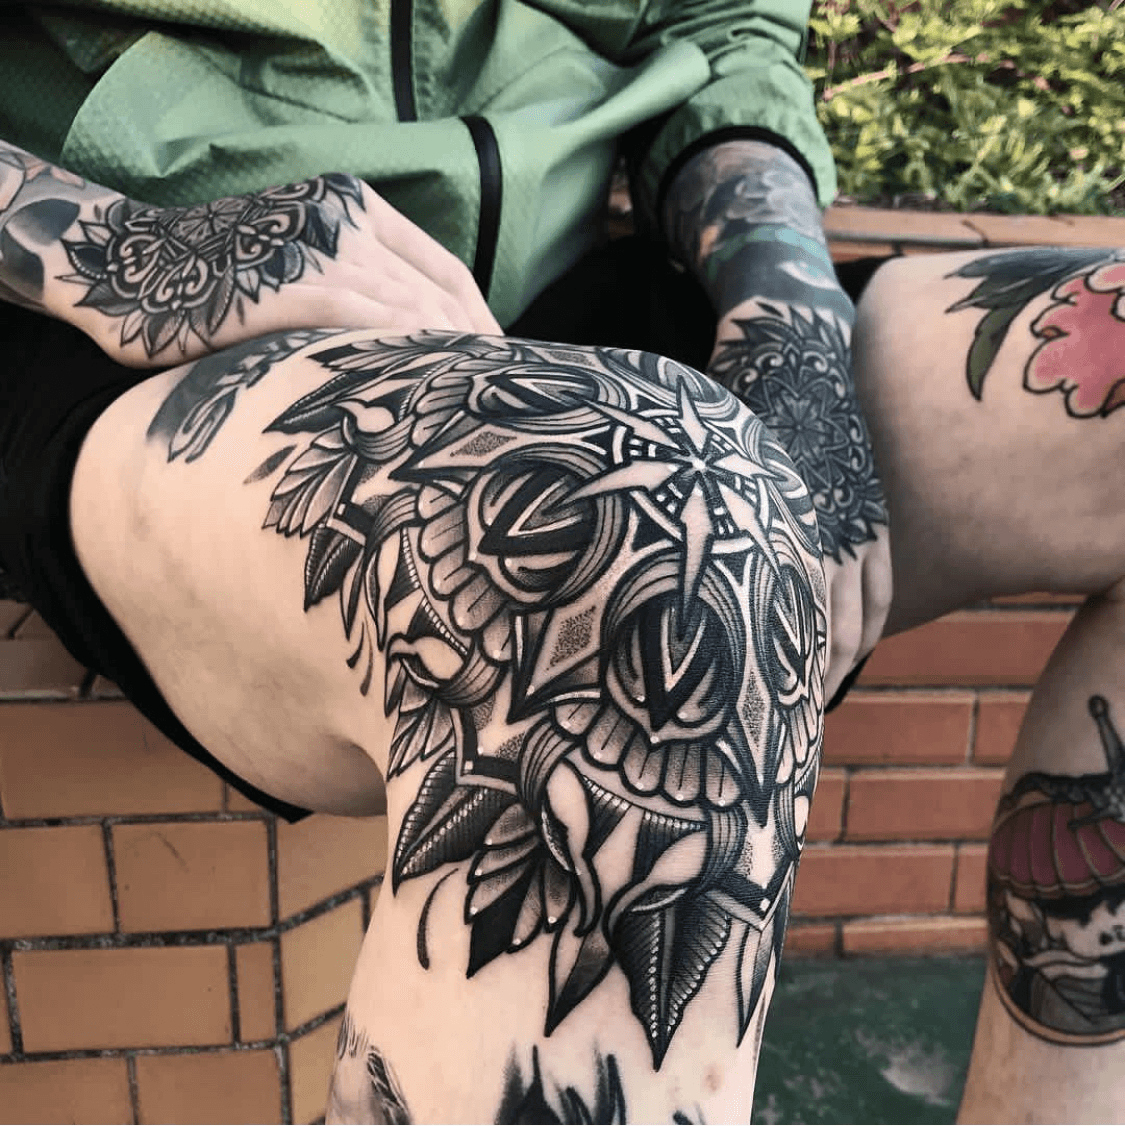 Aggregate 78 american traditional knee tattoos best  thtantai2